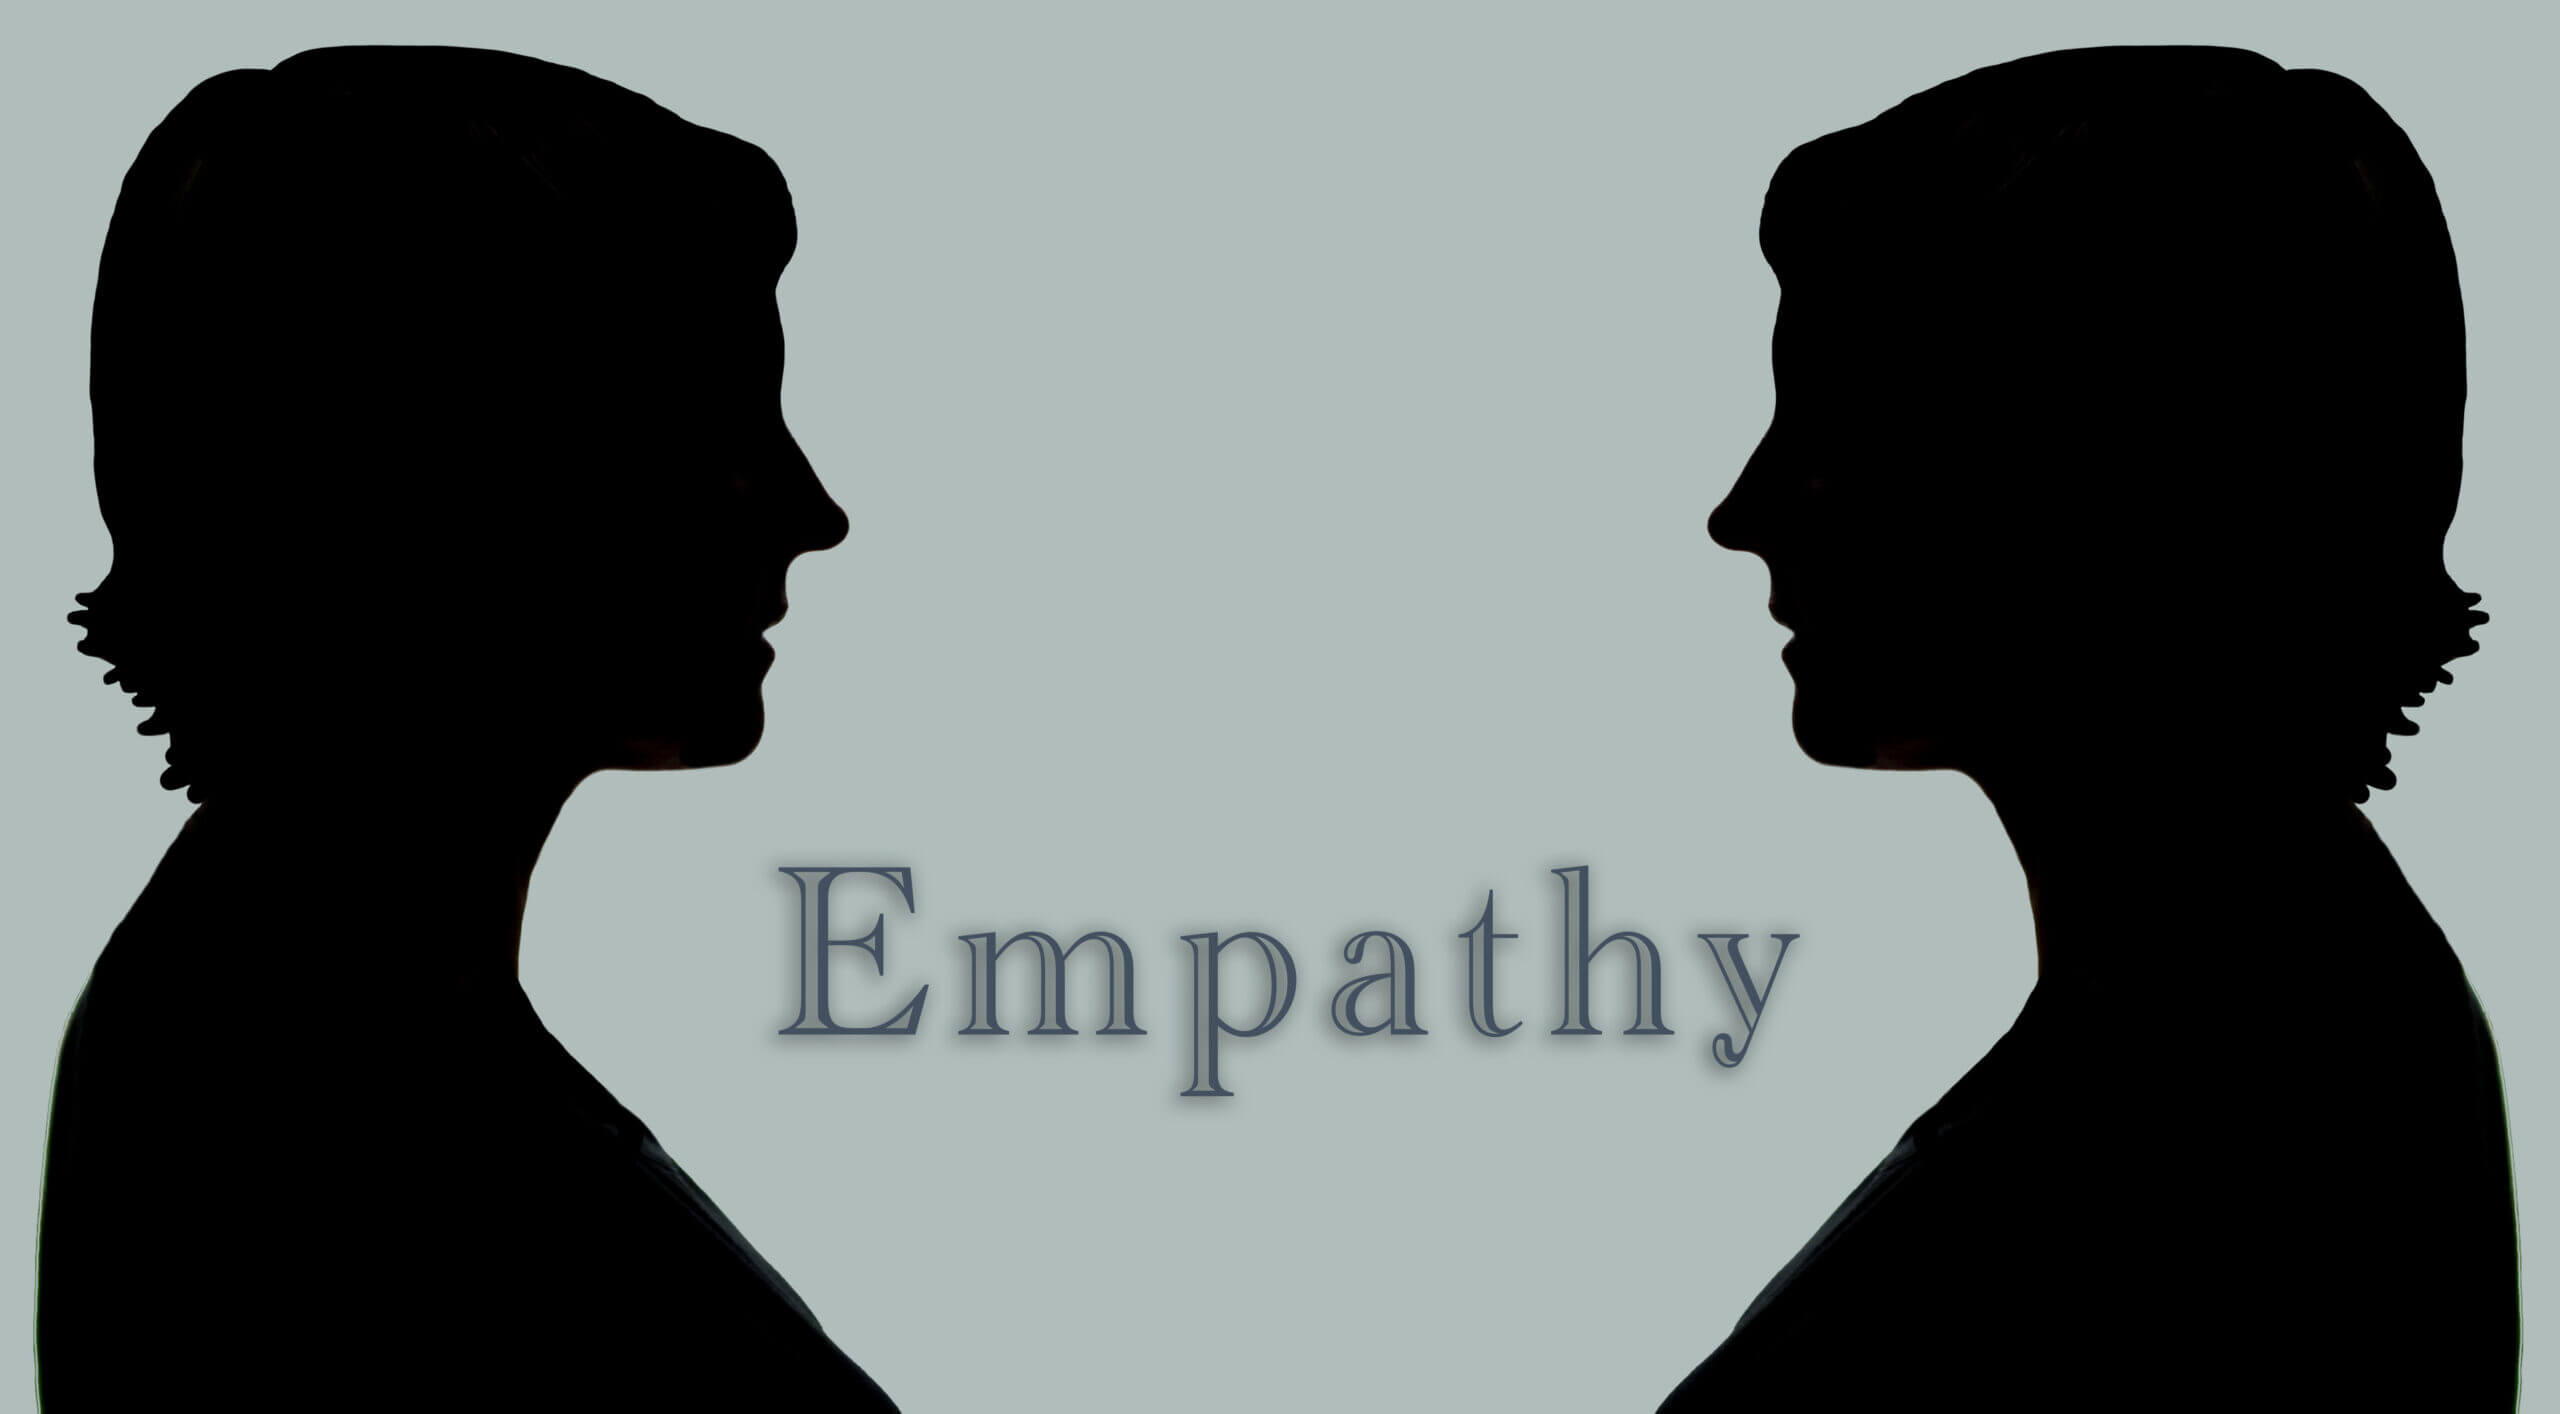 Two completely black silhouettes of the same woman facing each other with the word "Empathy" in the middle.